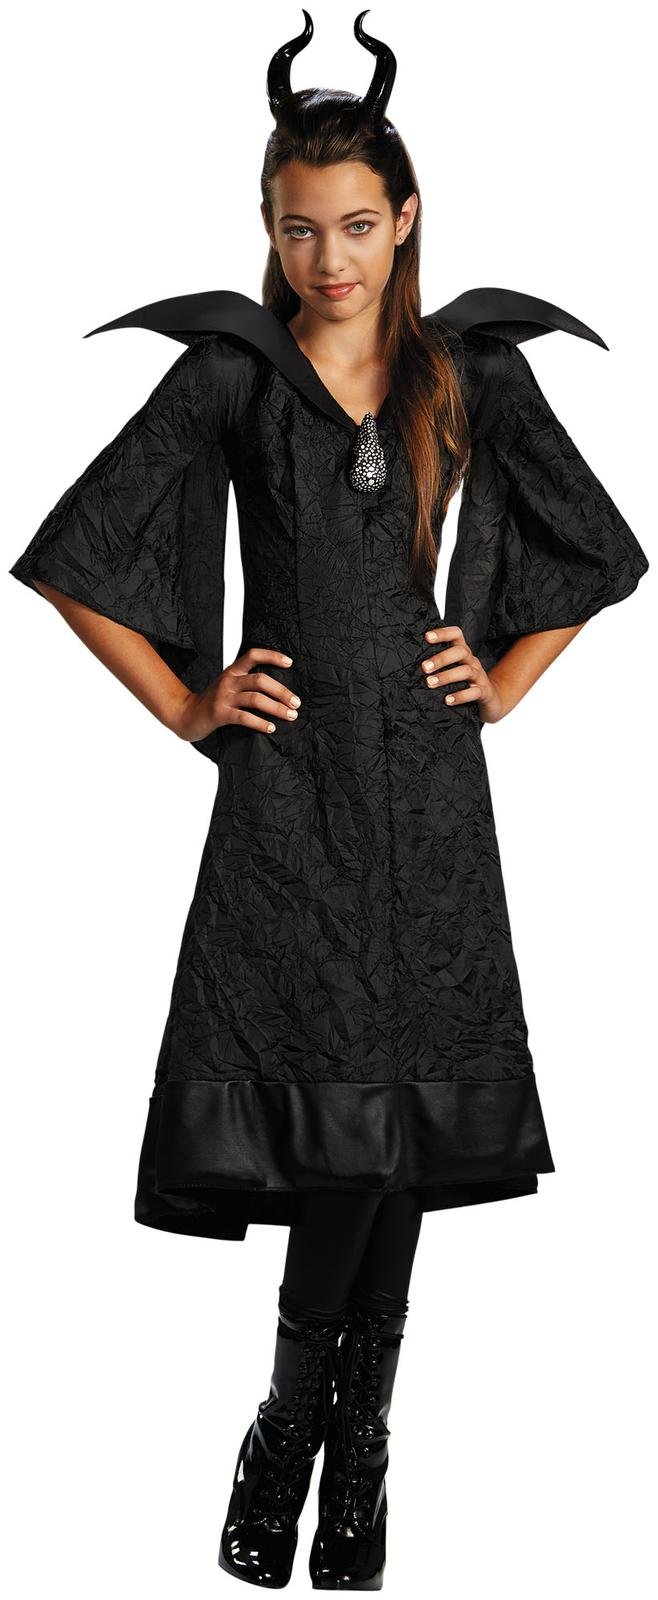 Maleficent Christening Black Gown Child Classic Costume